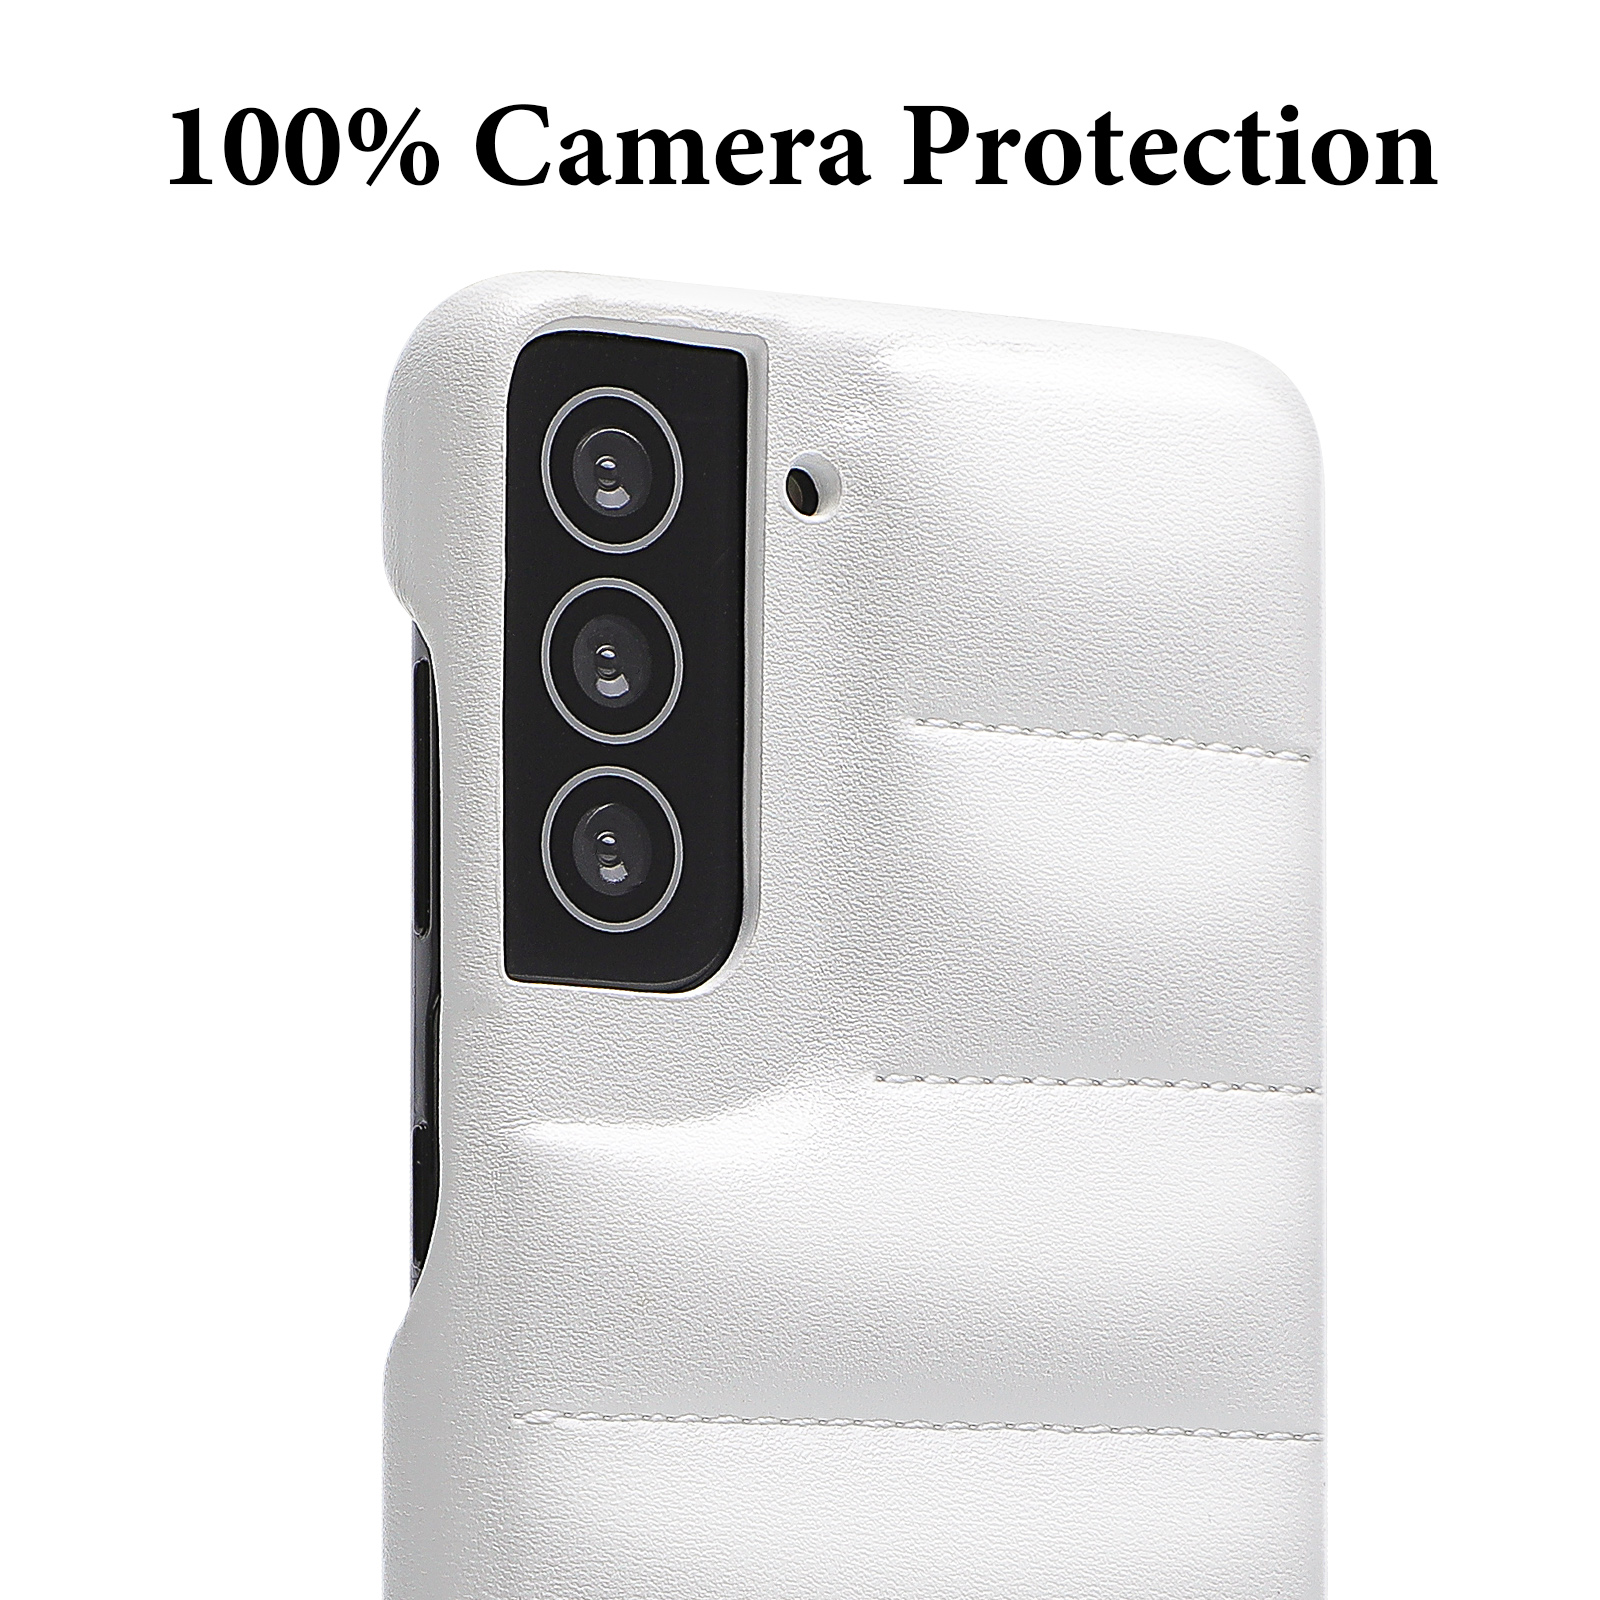 Hot Off for Samsung Galaxy S21 Ultra Case, Nappa Leather Puffer Phone Case Galaxy S21 Ultra Case [Full Body Protection] [Non-Slip] Shockproof Protective Phone Case, White for Galaxy S21 Ultra - image 3 of 5